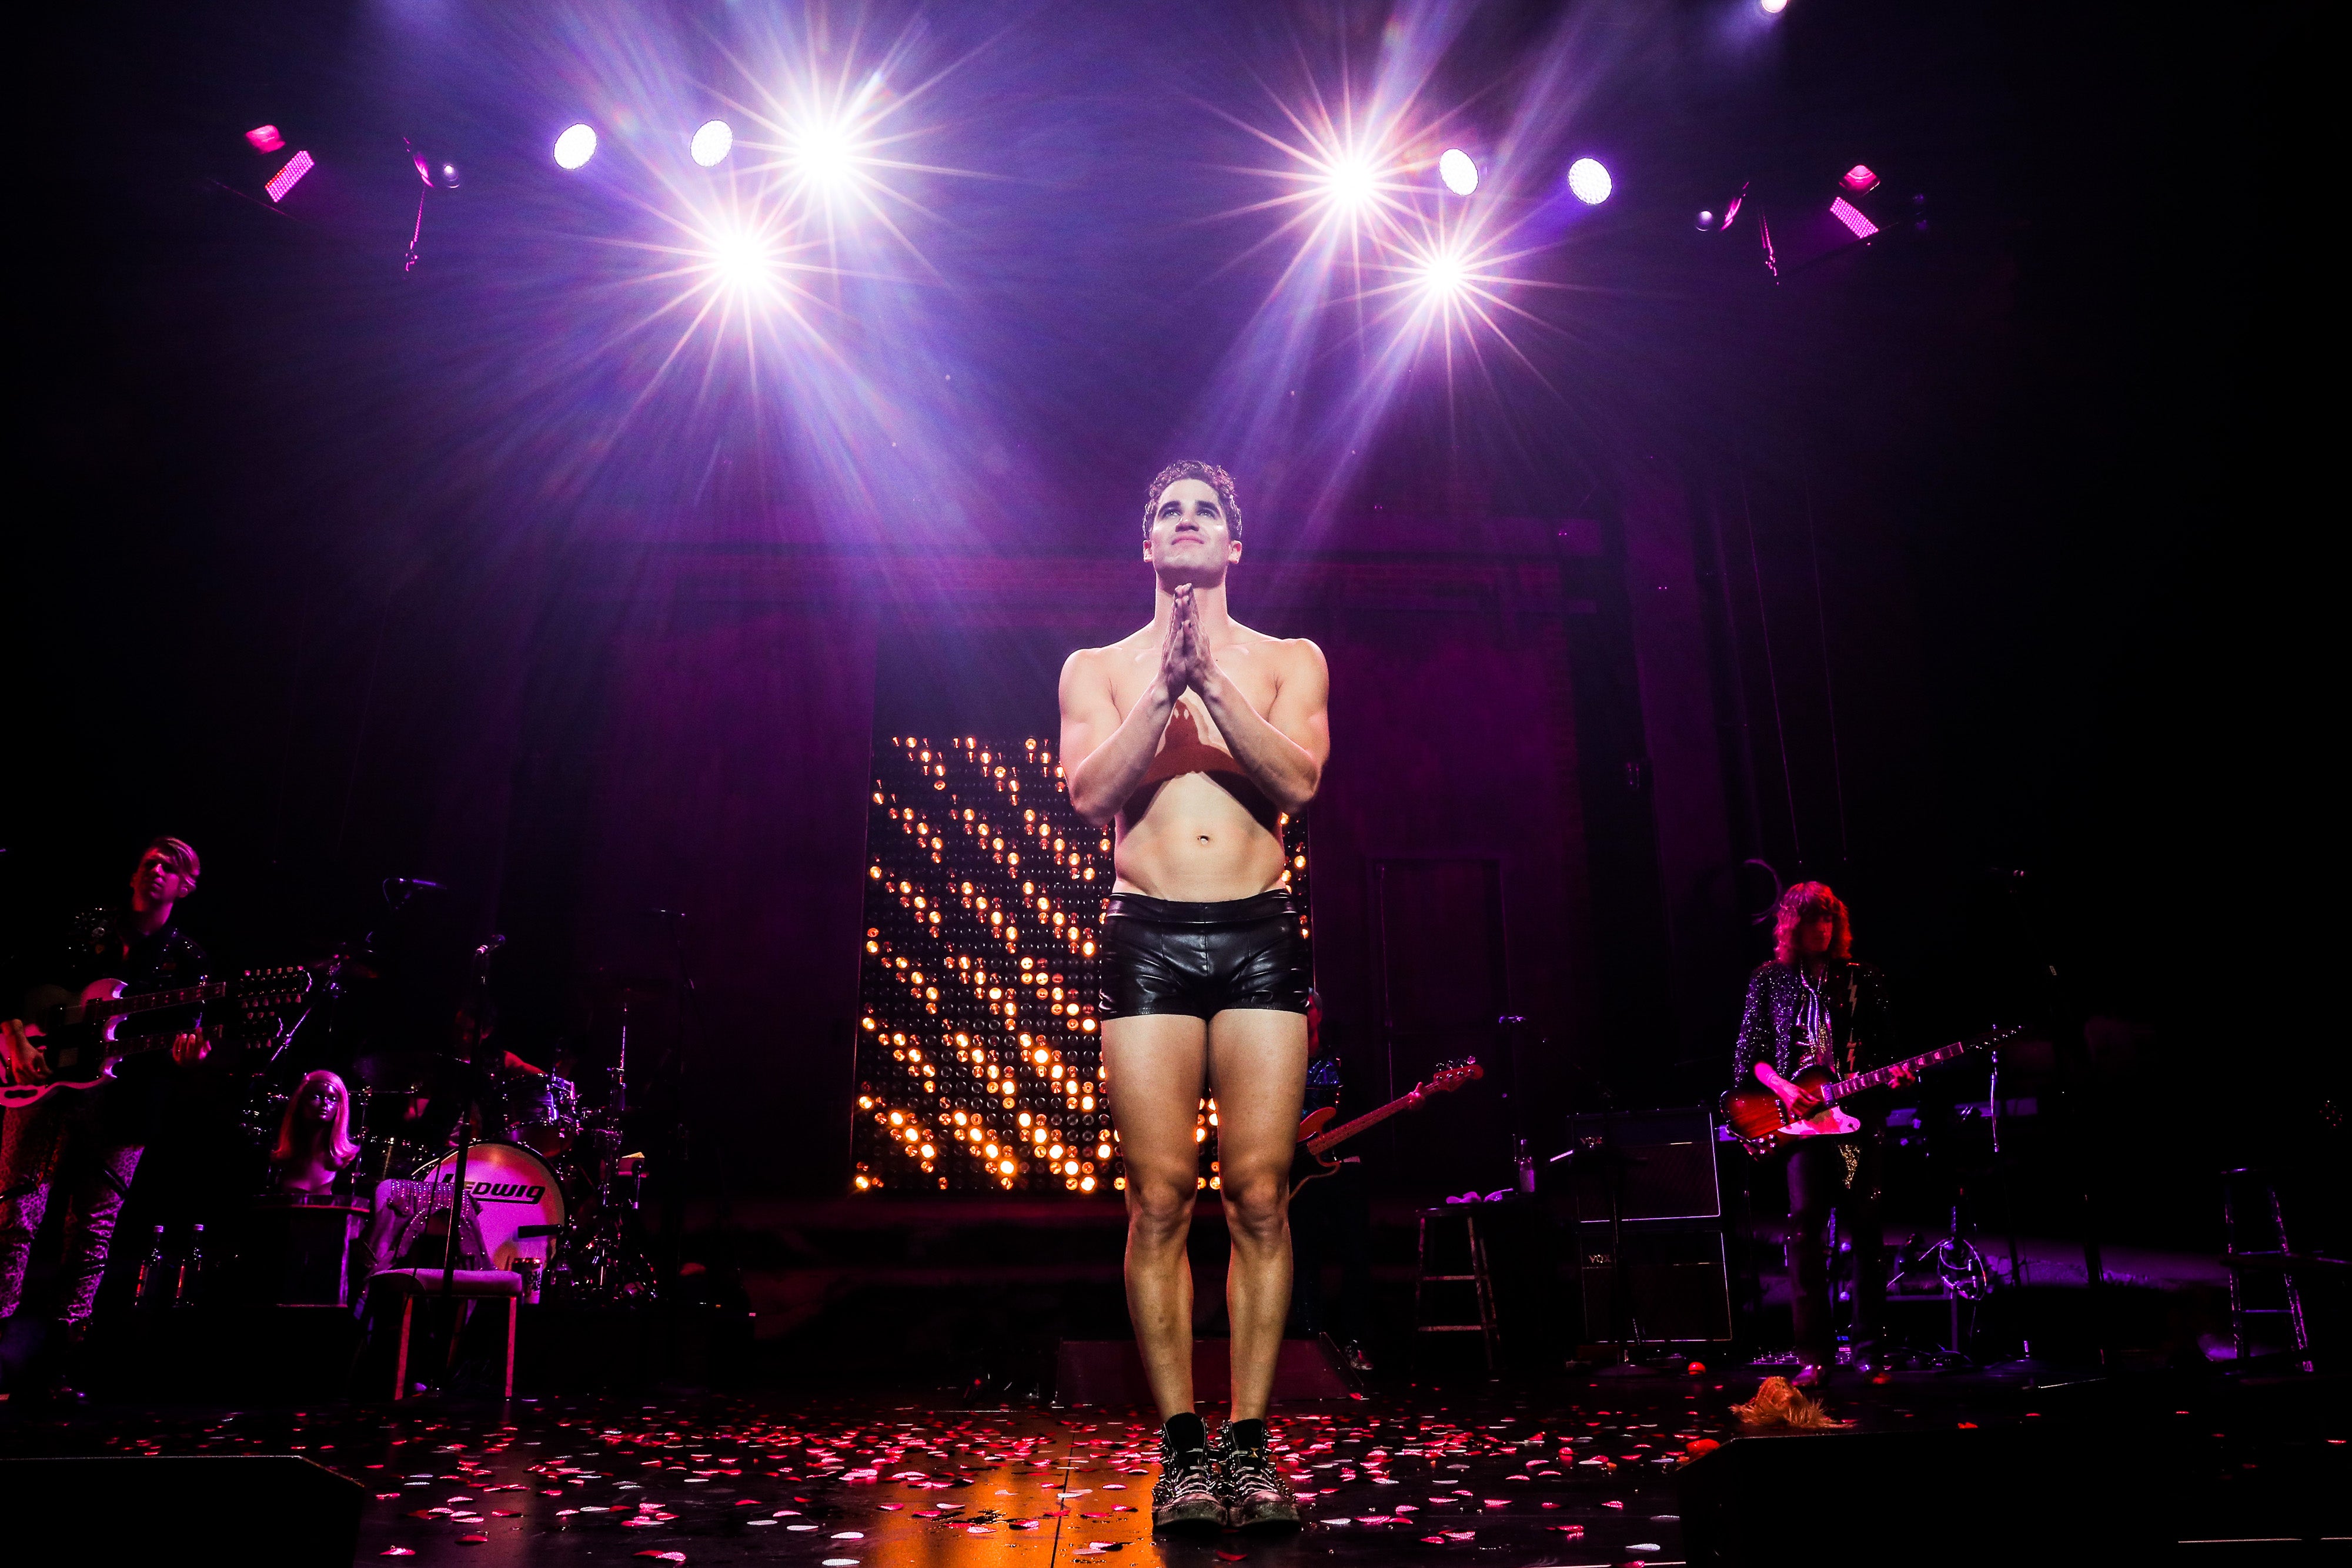 ‘Hedwig and the Angry Inch’ opens at the Pantages Theatre in Los Angeles in November 2016